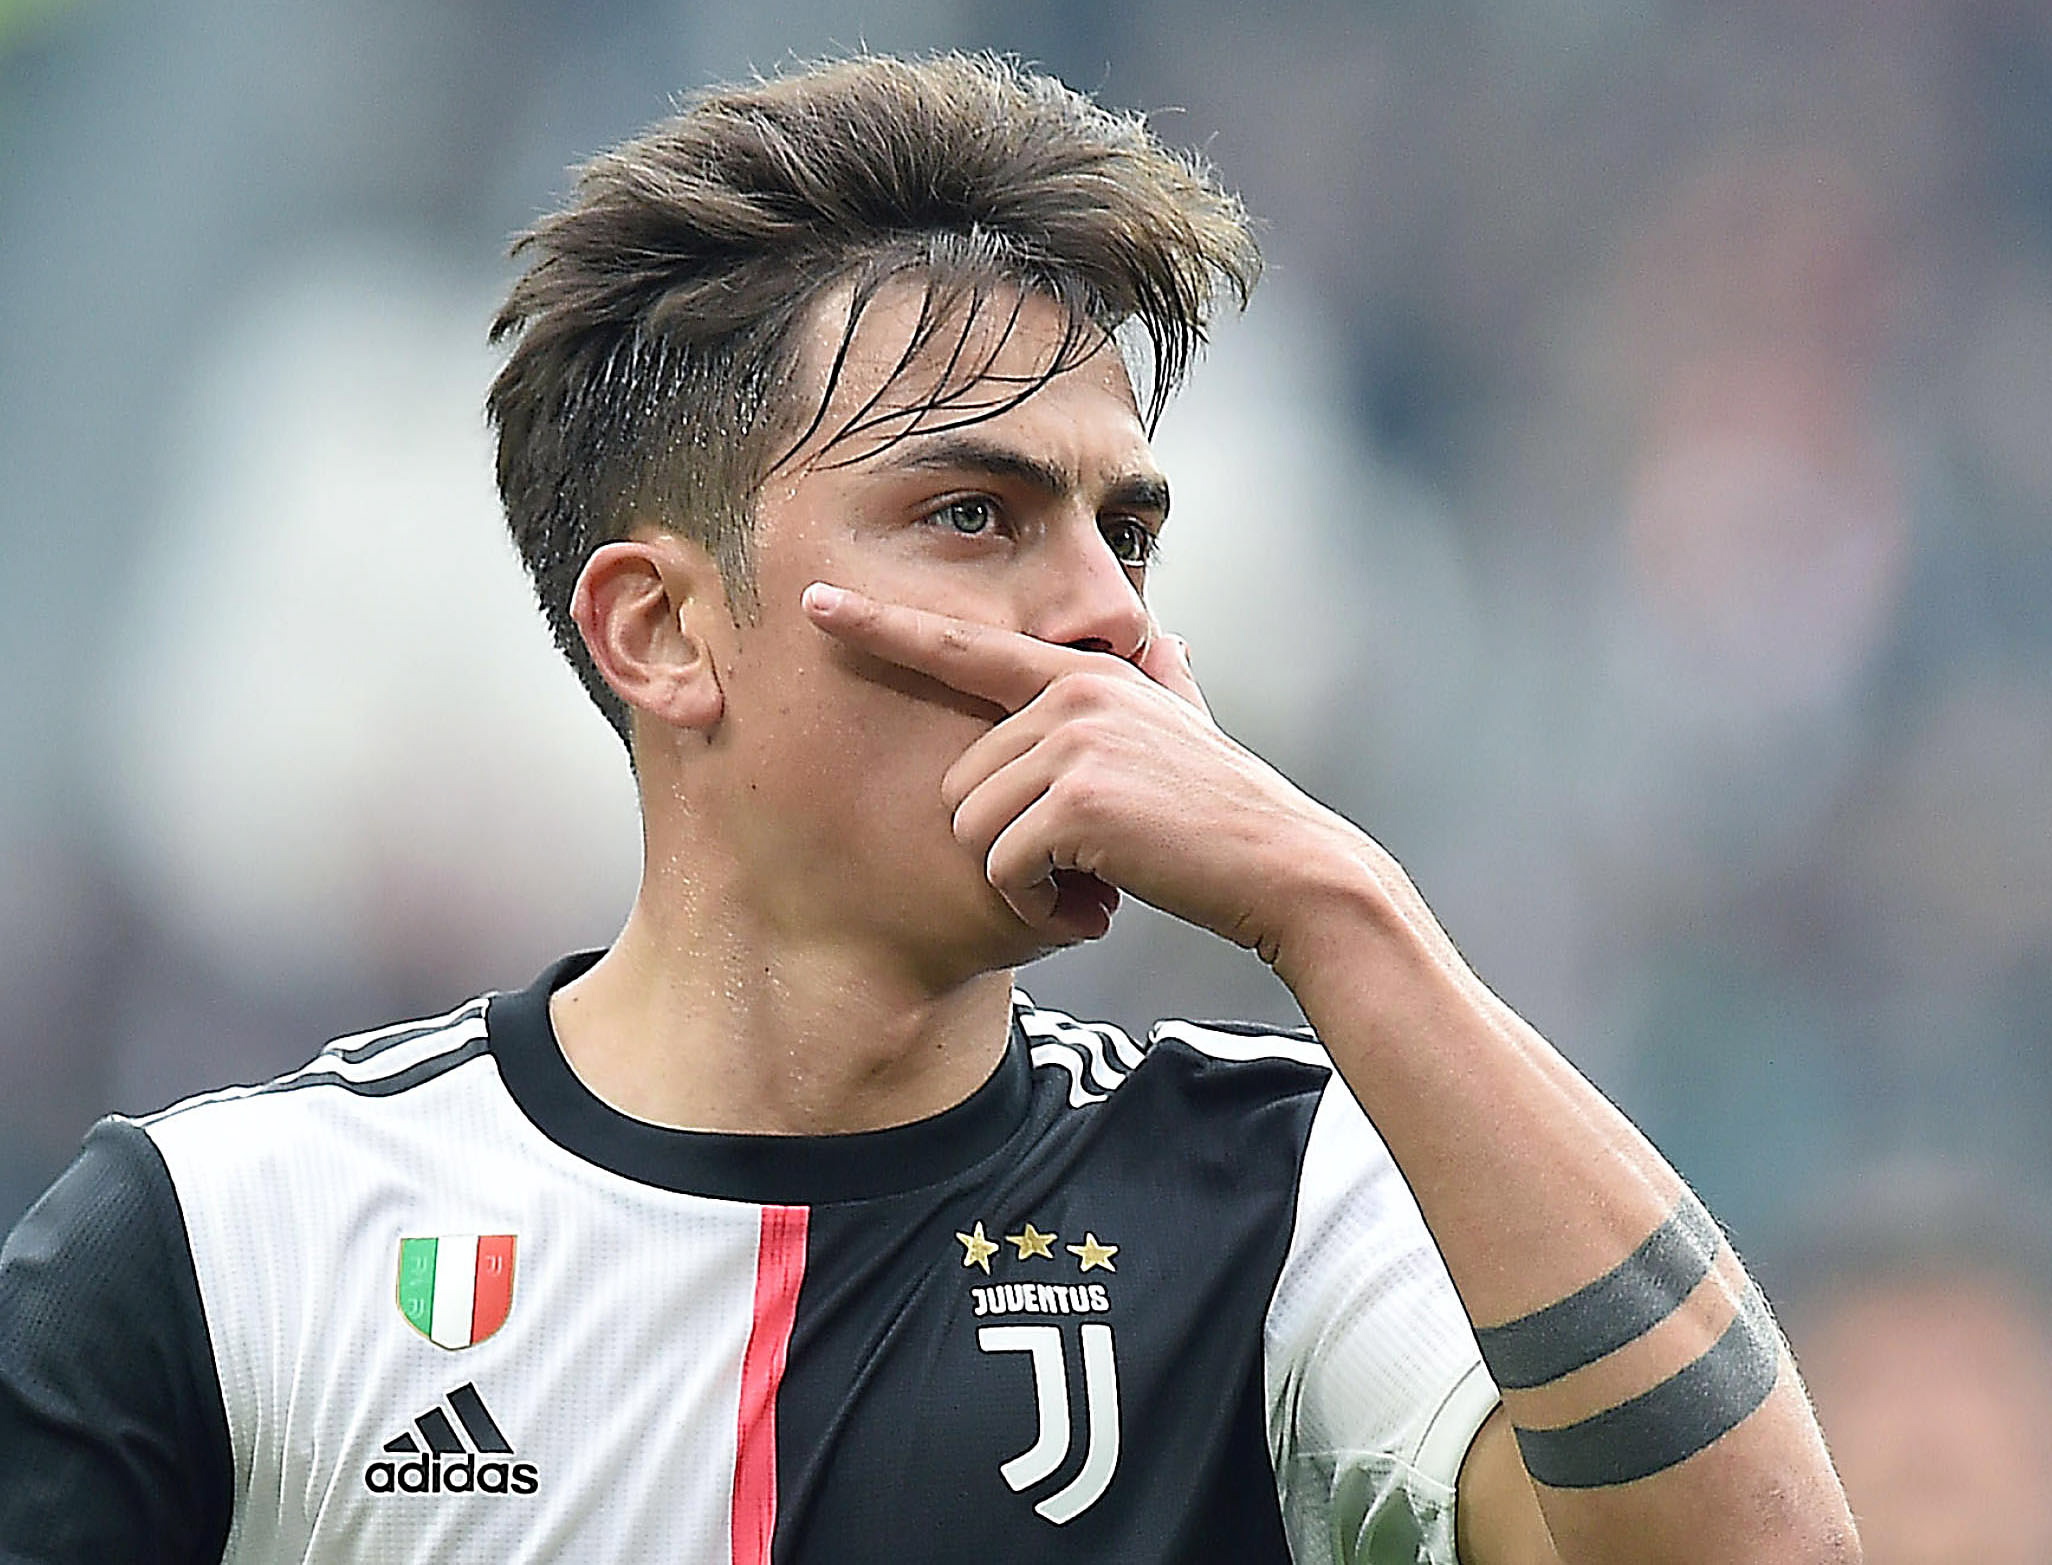 epa08312198 (FILE) Juventus’ player Paulo Dybala celebrates after scoring during the Italian Serie A soccer match Juventus FC vs Brescia Calcio at the Allianz stadium in Turin, Italy, 16 February 2020.  According to reports on 21 March 2021, Paulo Dybala has tested positive for COVID-19. He is in voluntary home isolation and he is asymptomatic.  EPA/ALESSANDRO DI MARCO